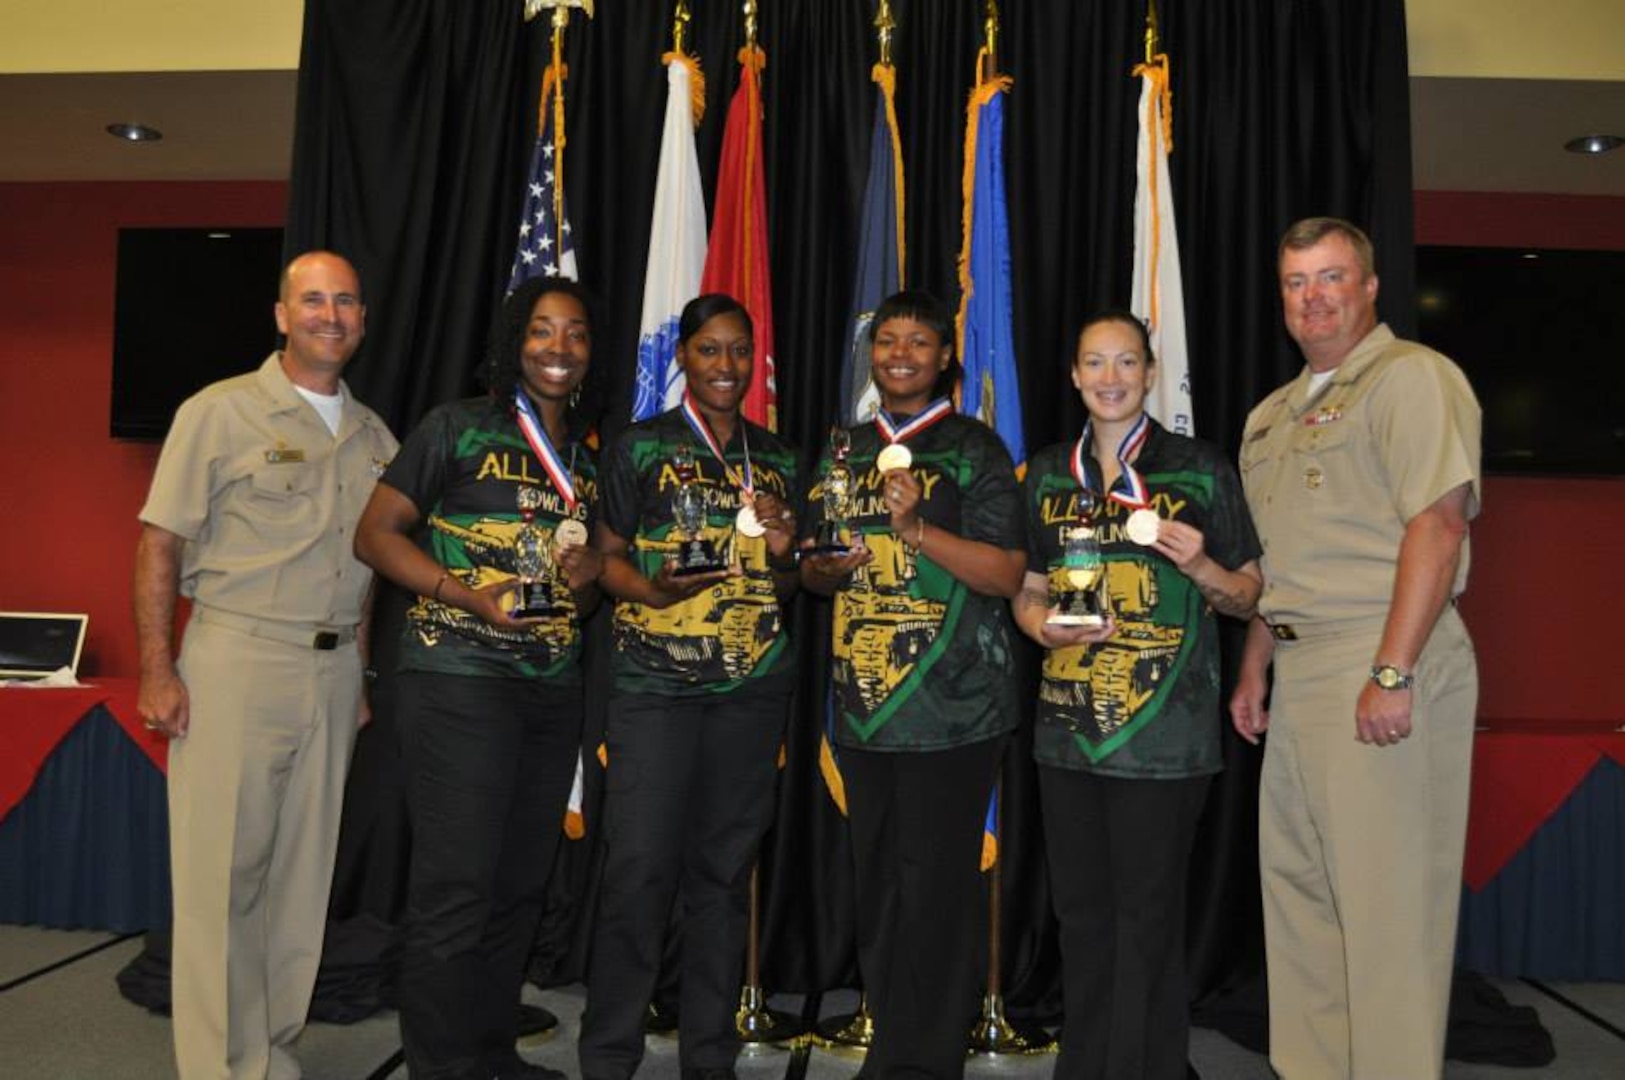 Army Women's gold medal team at the 2015 Armed Forces Bowling Championship held at NAS Jacksonville, Fla. from 11-18 May